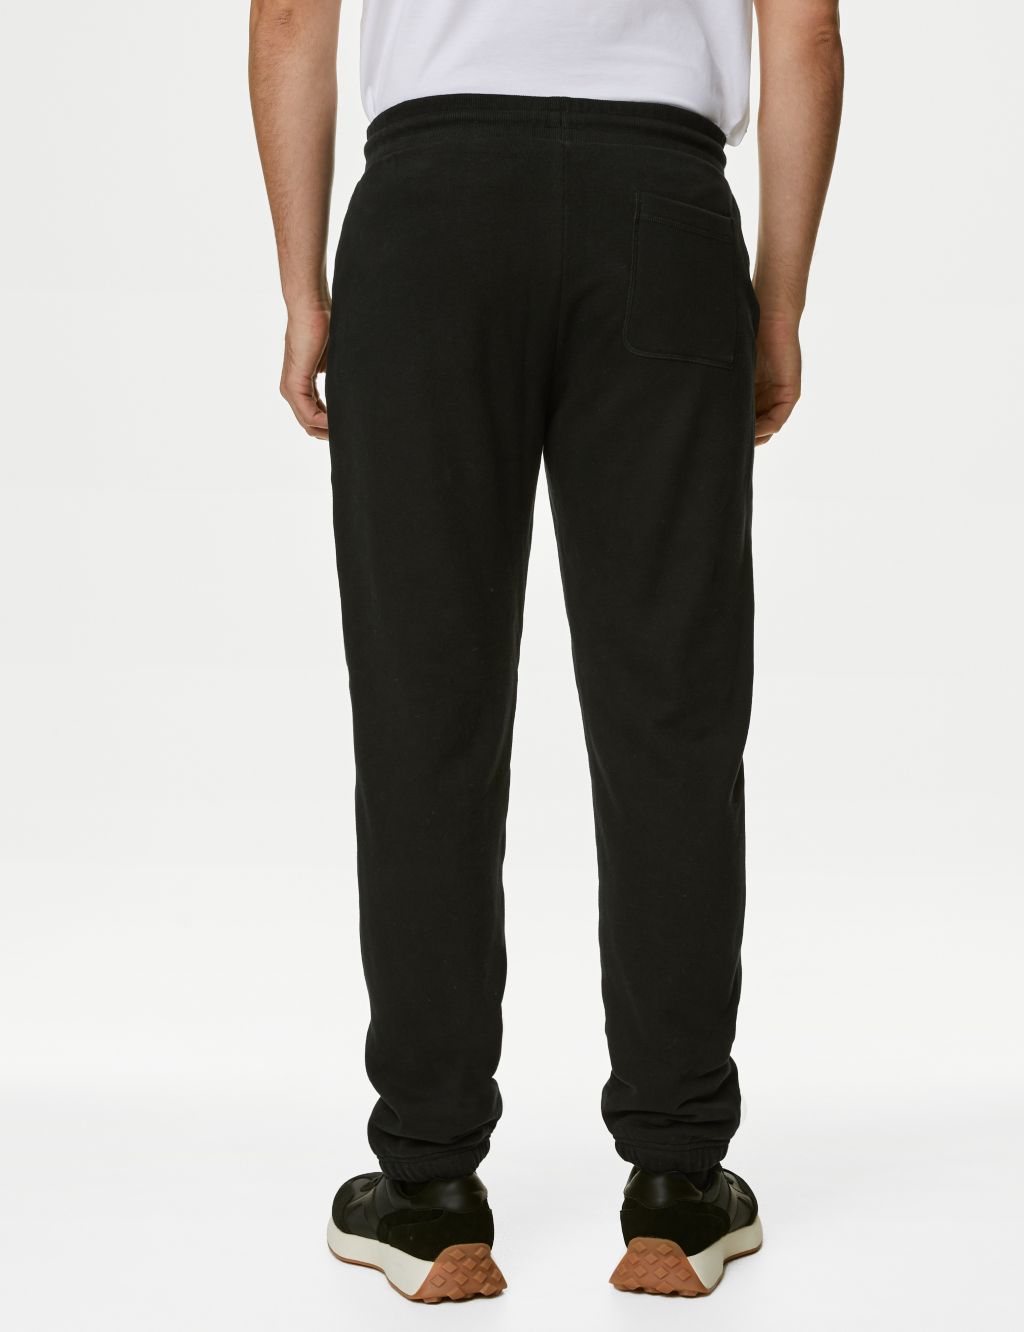 Drawstring Pure Cotton Fleece Lined Joggers image 5